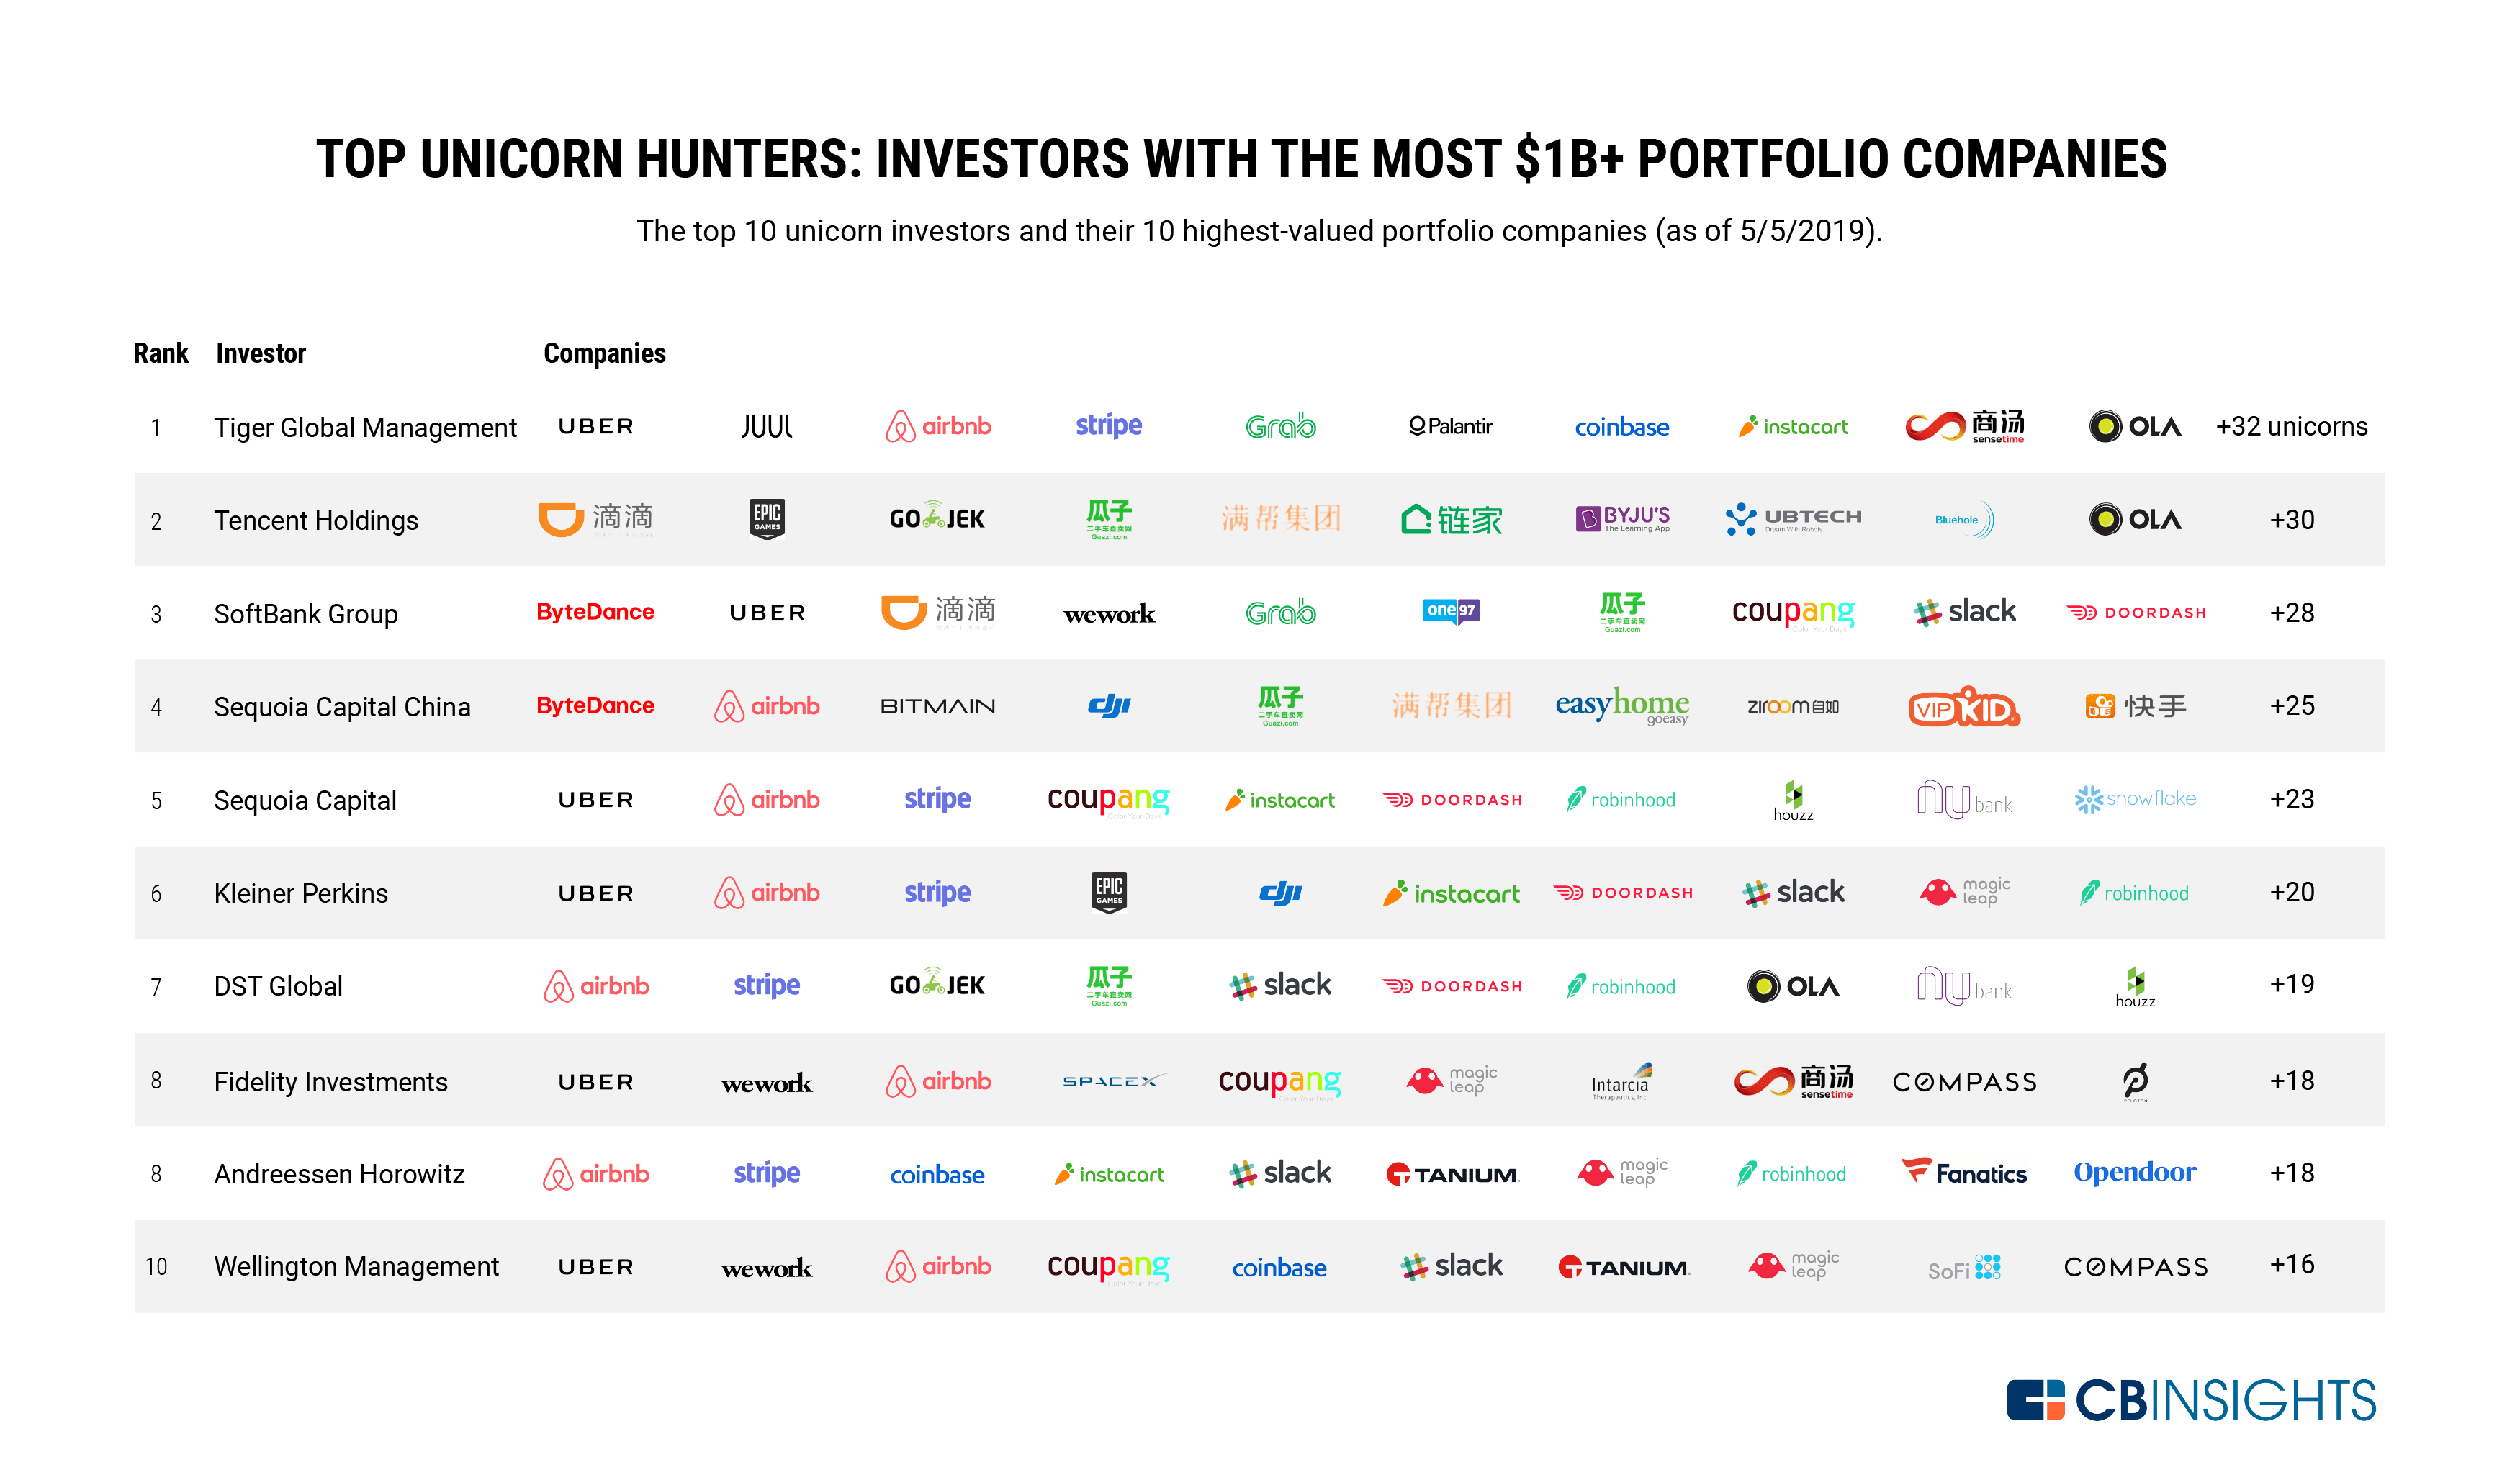 Unicorn Hunters These Investors Have Backed The Most Billion Dollar Companies